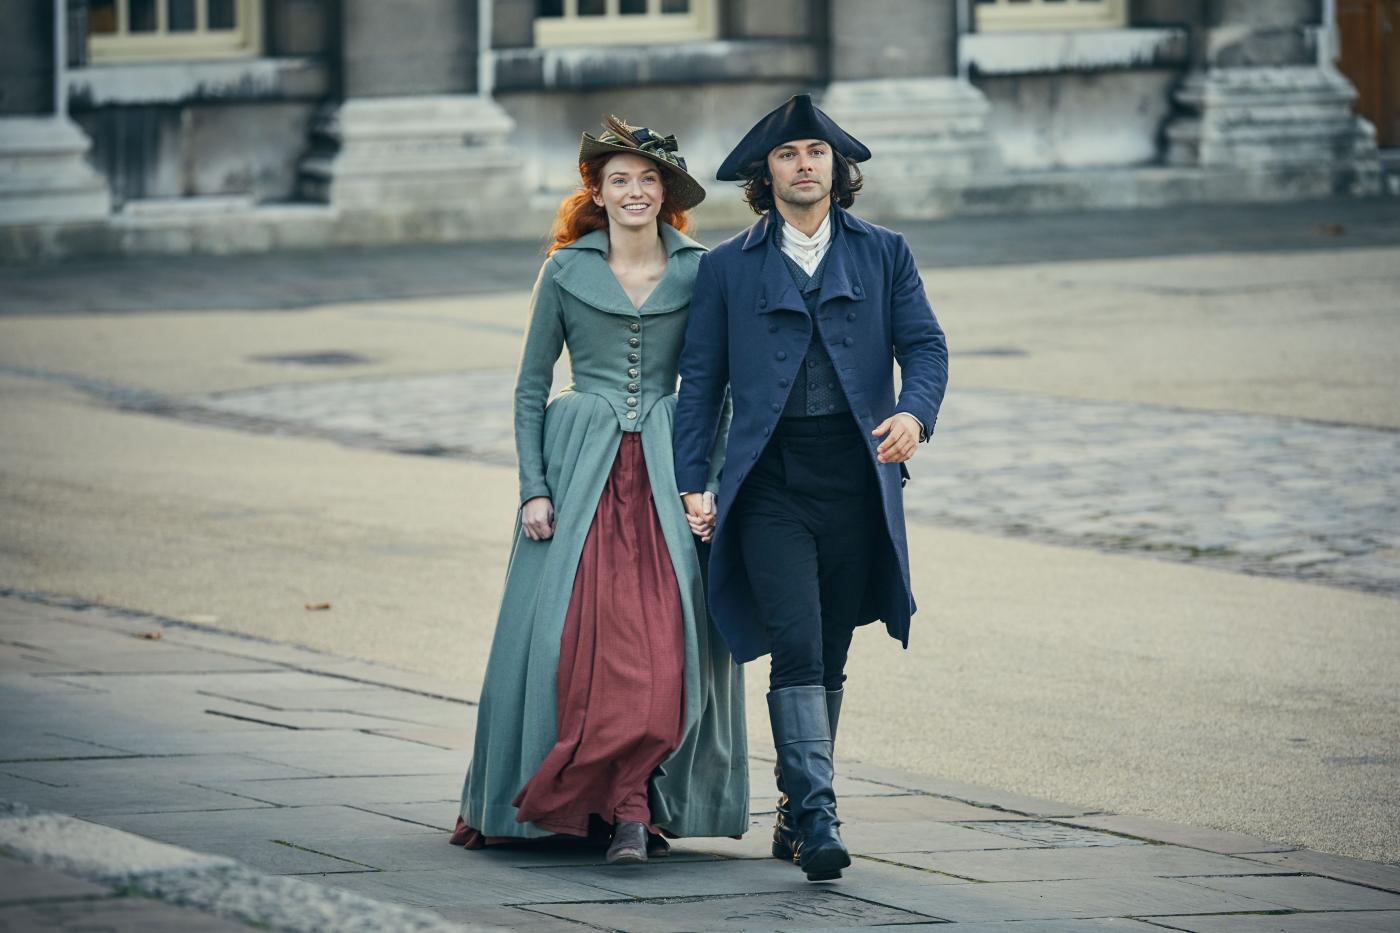 Eleanor Tomlinson as Demelza and Aidan Turner as Ross Poldark. Photo: Mammoth Screen for BBC and MASTERPIECE